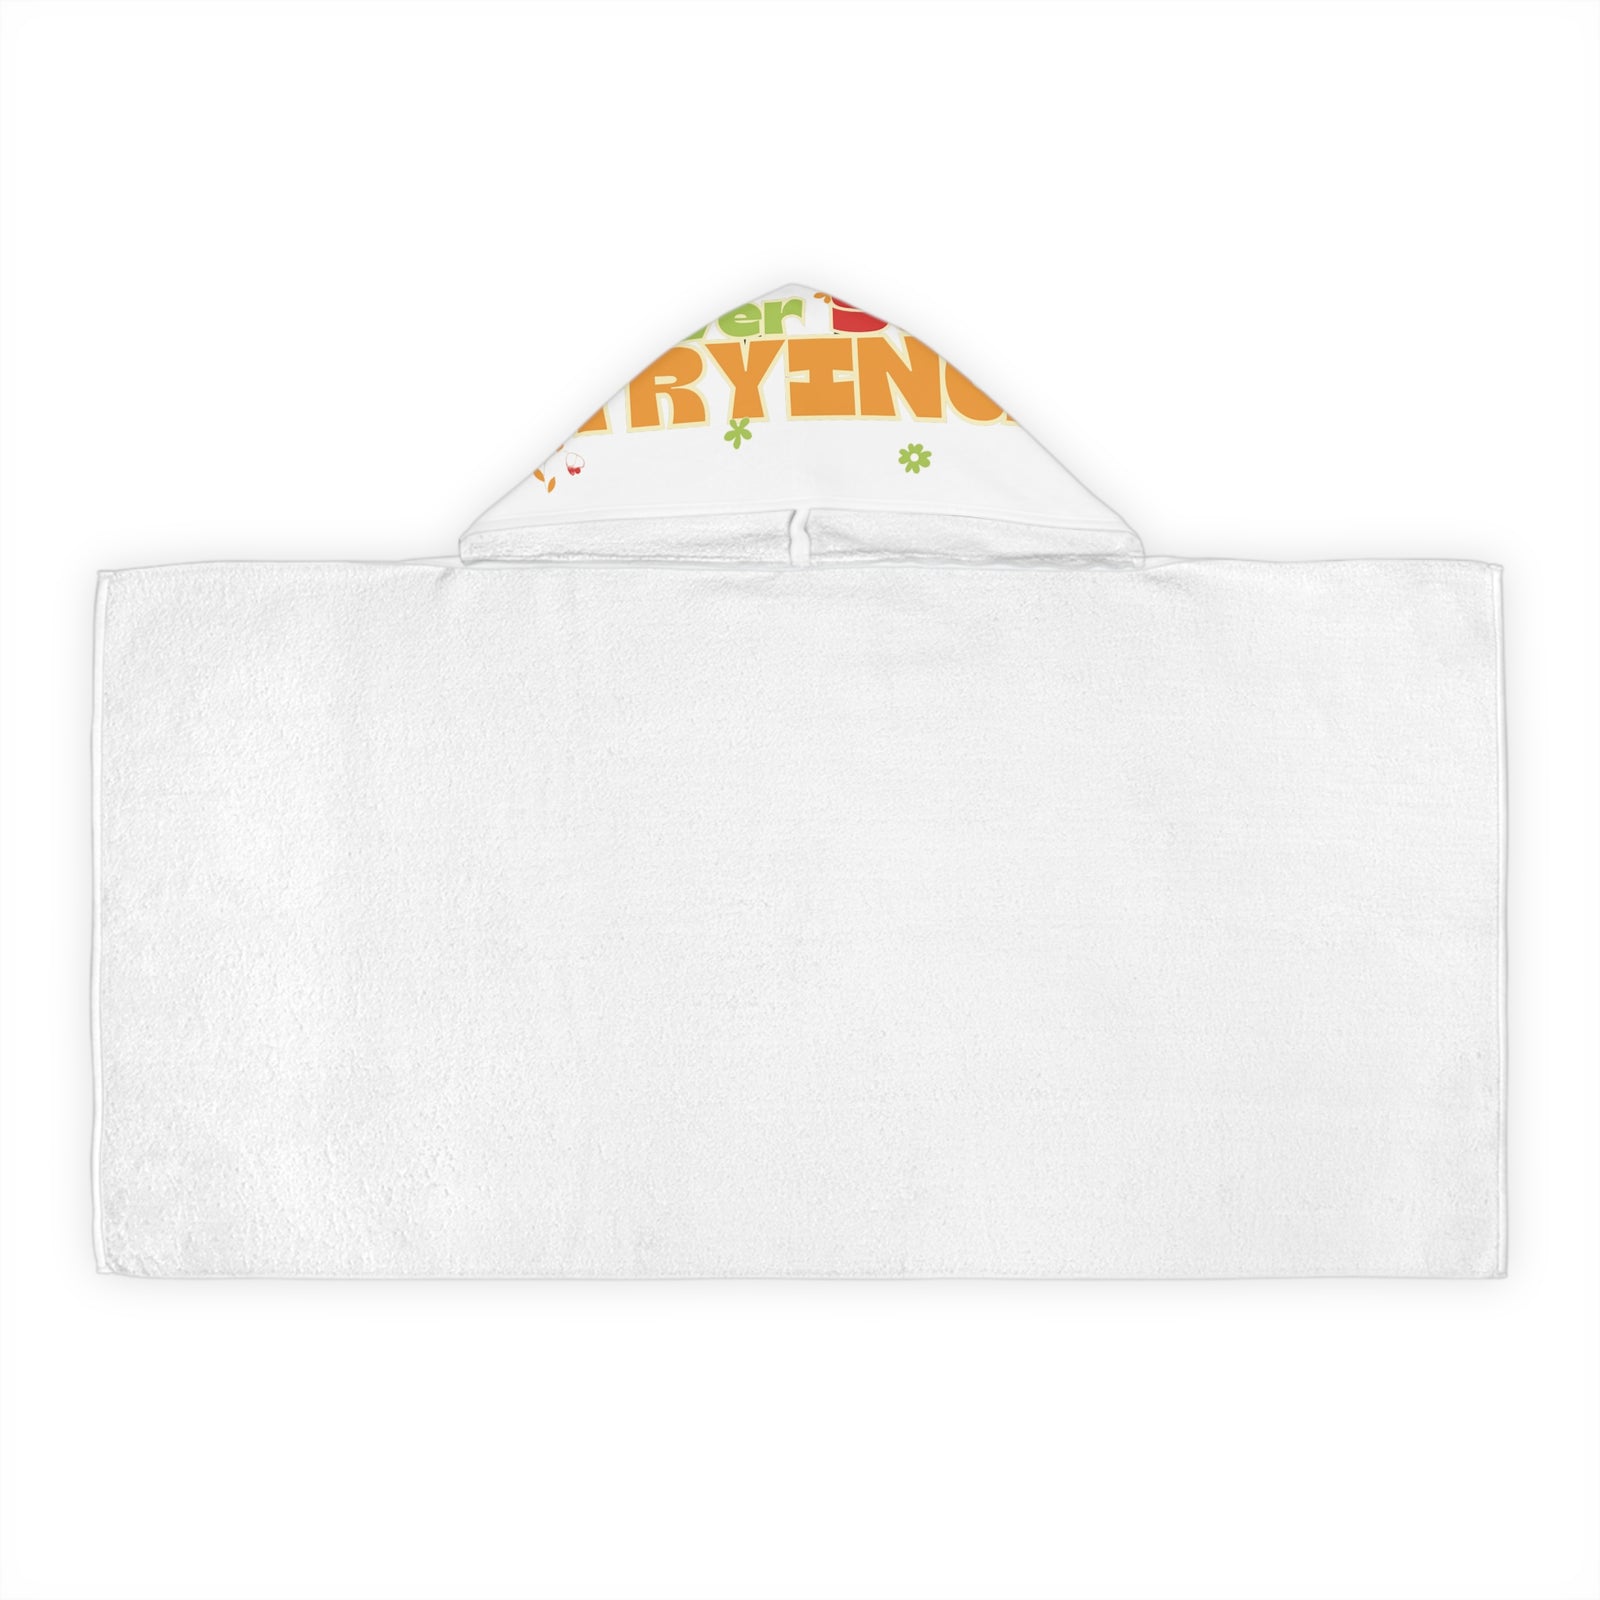 TRYKID Logo Youth Hooded Towel with 'NEVER STOP TRYING' Motto – Perfect for Kids!